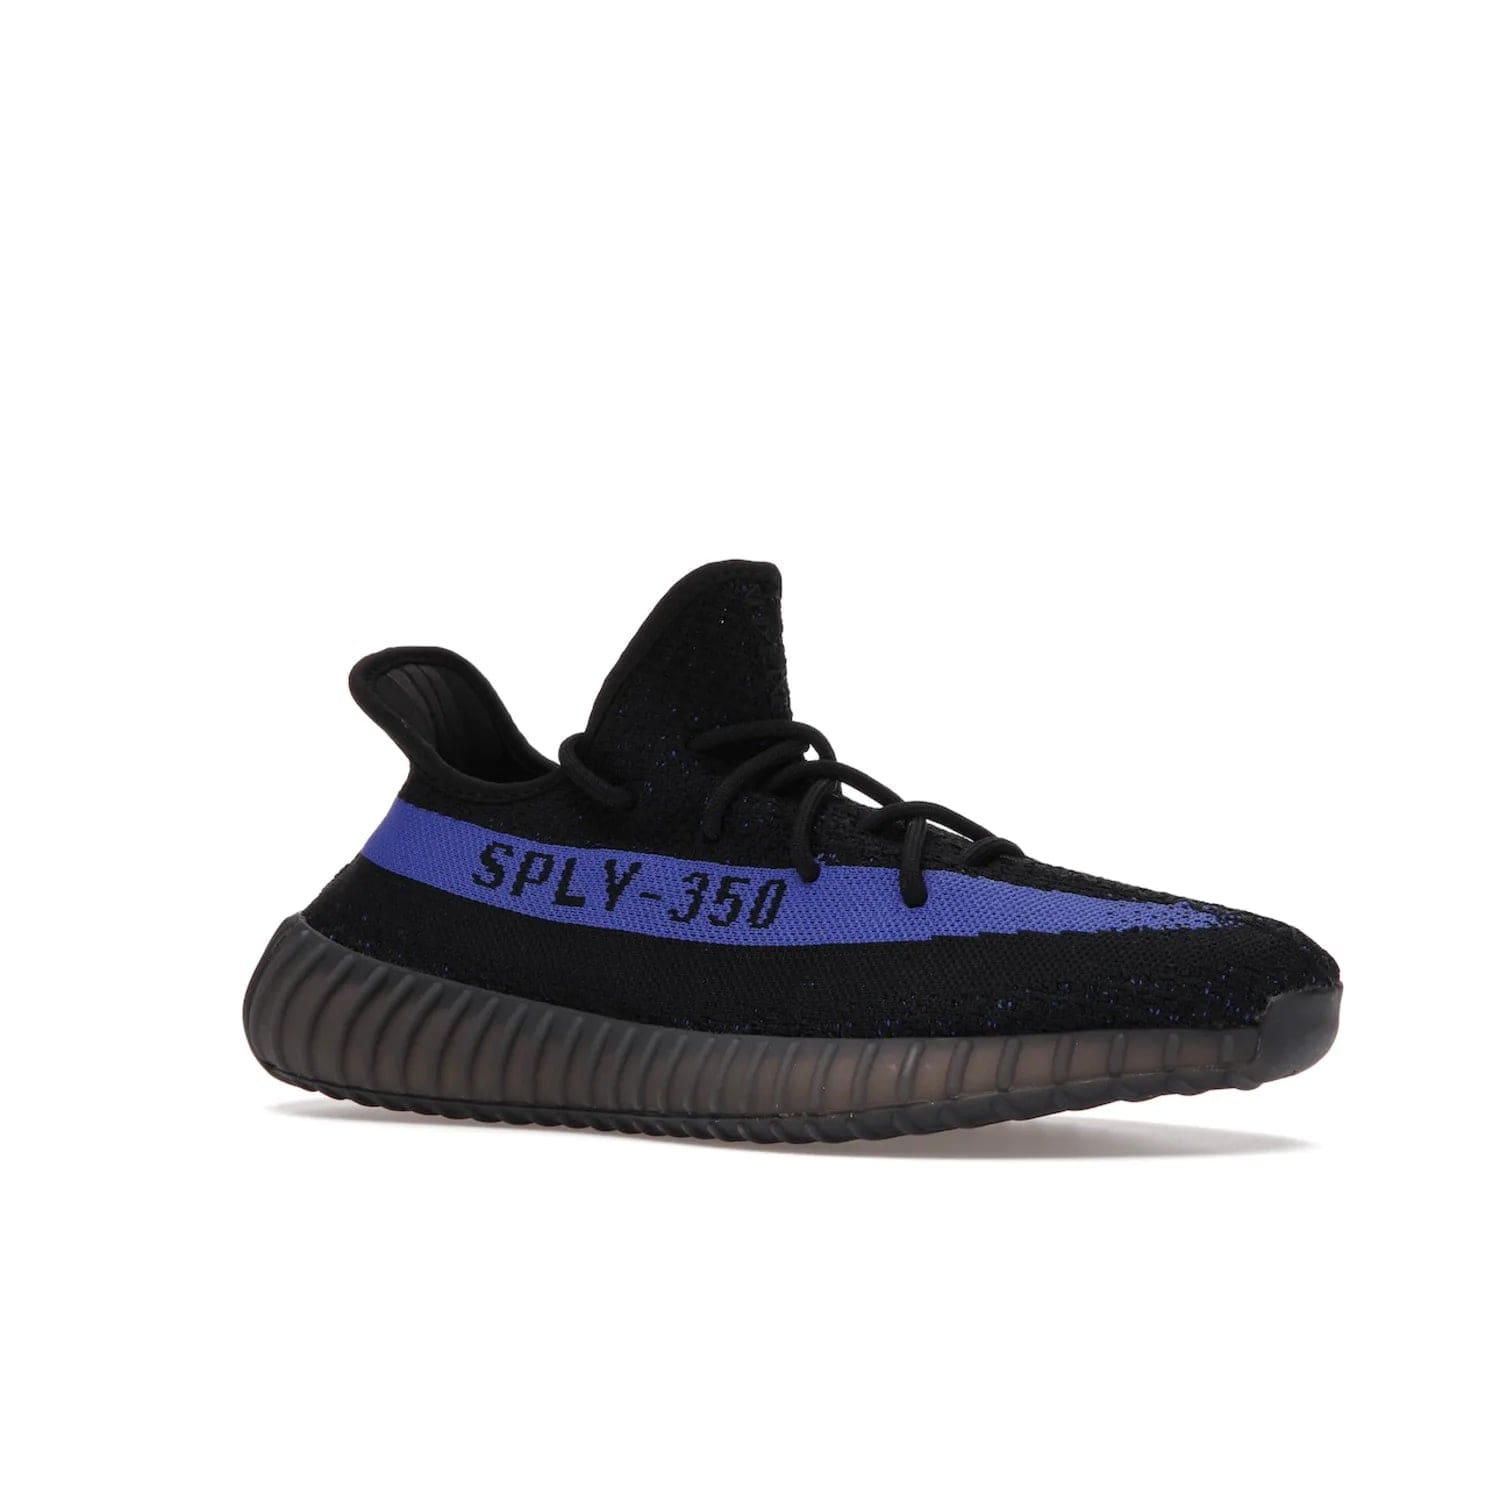 adidas Yeezy Boost 350 V2 Dazzling Blue - Image 4 - Only at www.BallersClubKickz.com - Shop the Adidas Yeezy 350 V2 Dazzling Blue, featuring a solid black Primeknit upper, Dazzling Blue side stripe, “SPLY-350” text, and a muted Boost sole. Releasing Feb 2022, this style is perfect for any shoe fan.